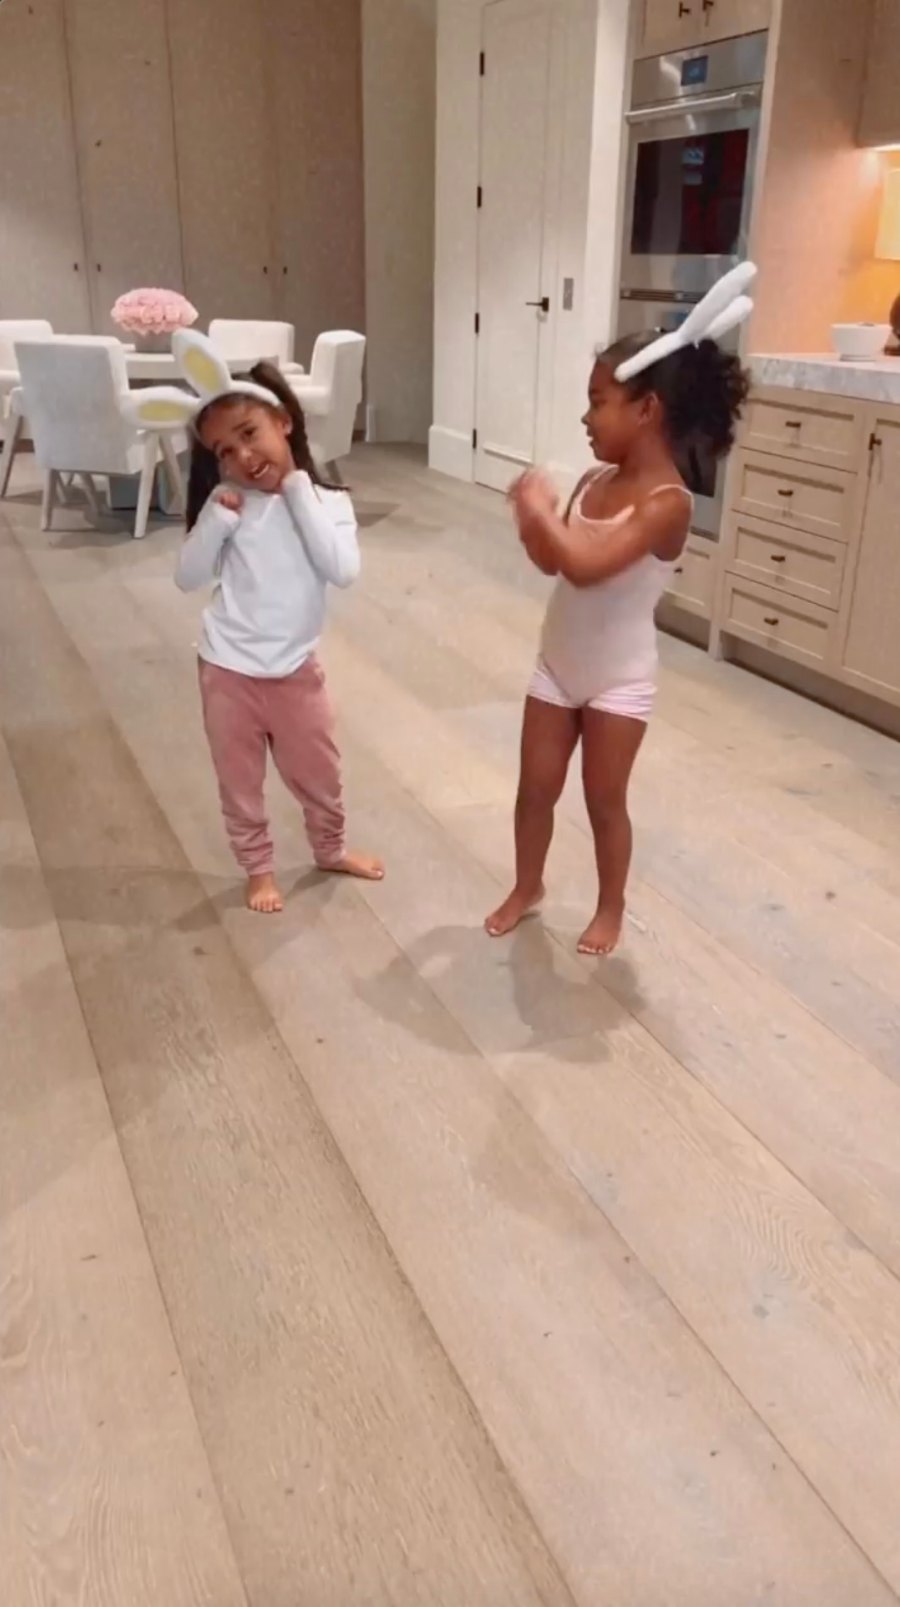 ‘Sing it, Girls’! Khloe Kardashian’s Daughter and Niece Have Dance Party